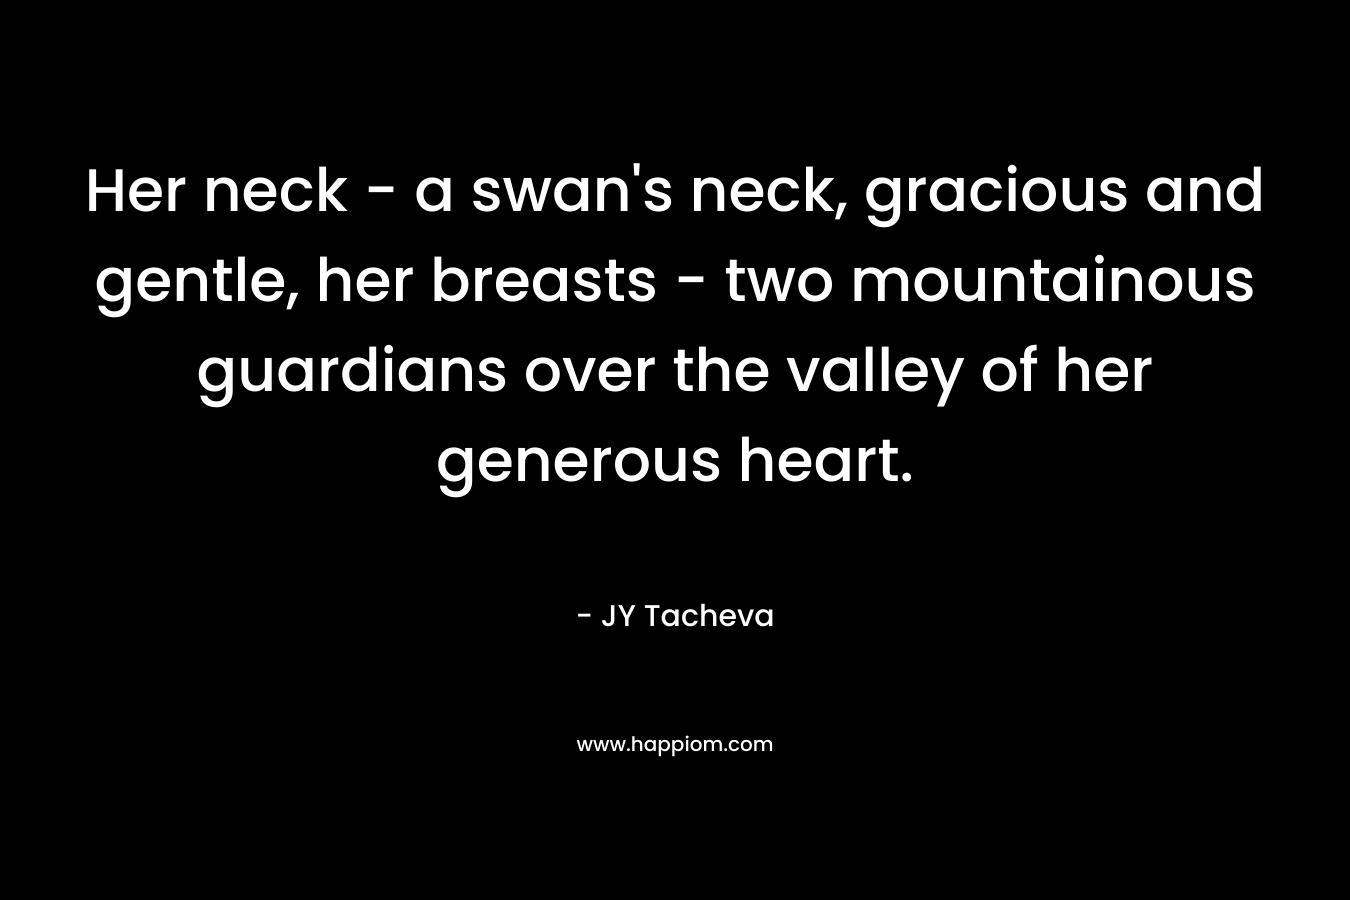 Her neck – a swan’s neck, gracious and gentle, her breasts – two mountainous guardians over the valley of her generous heart. – JY Tacheva